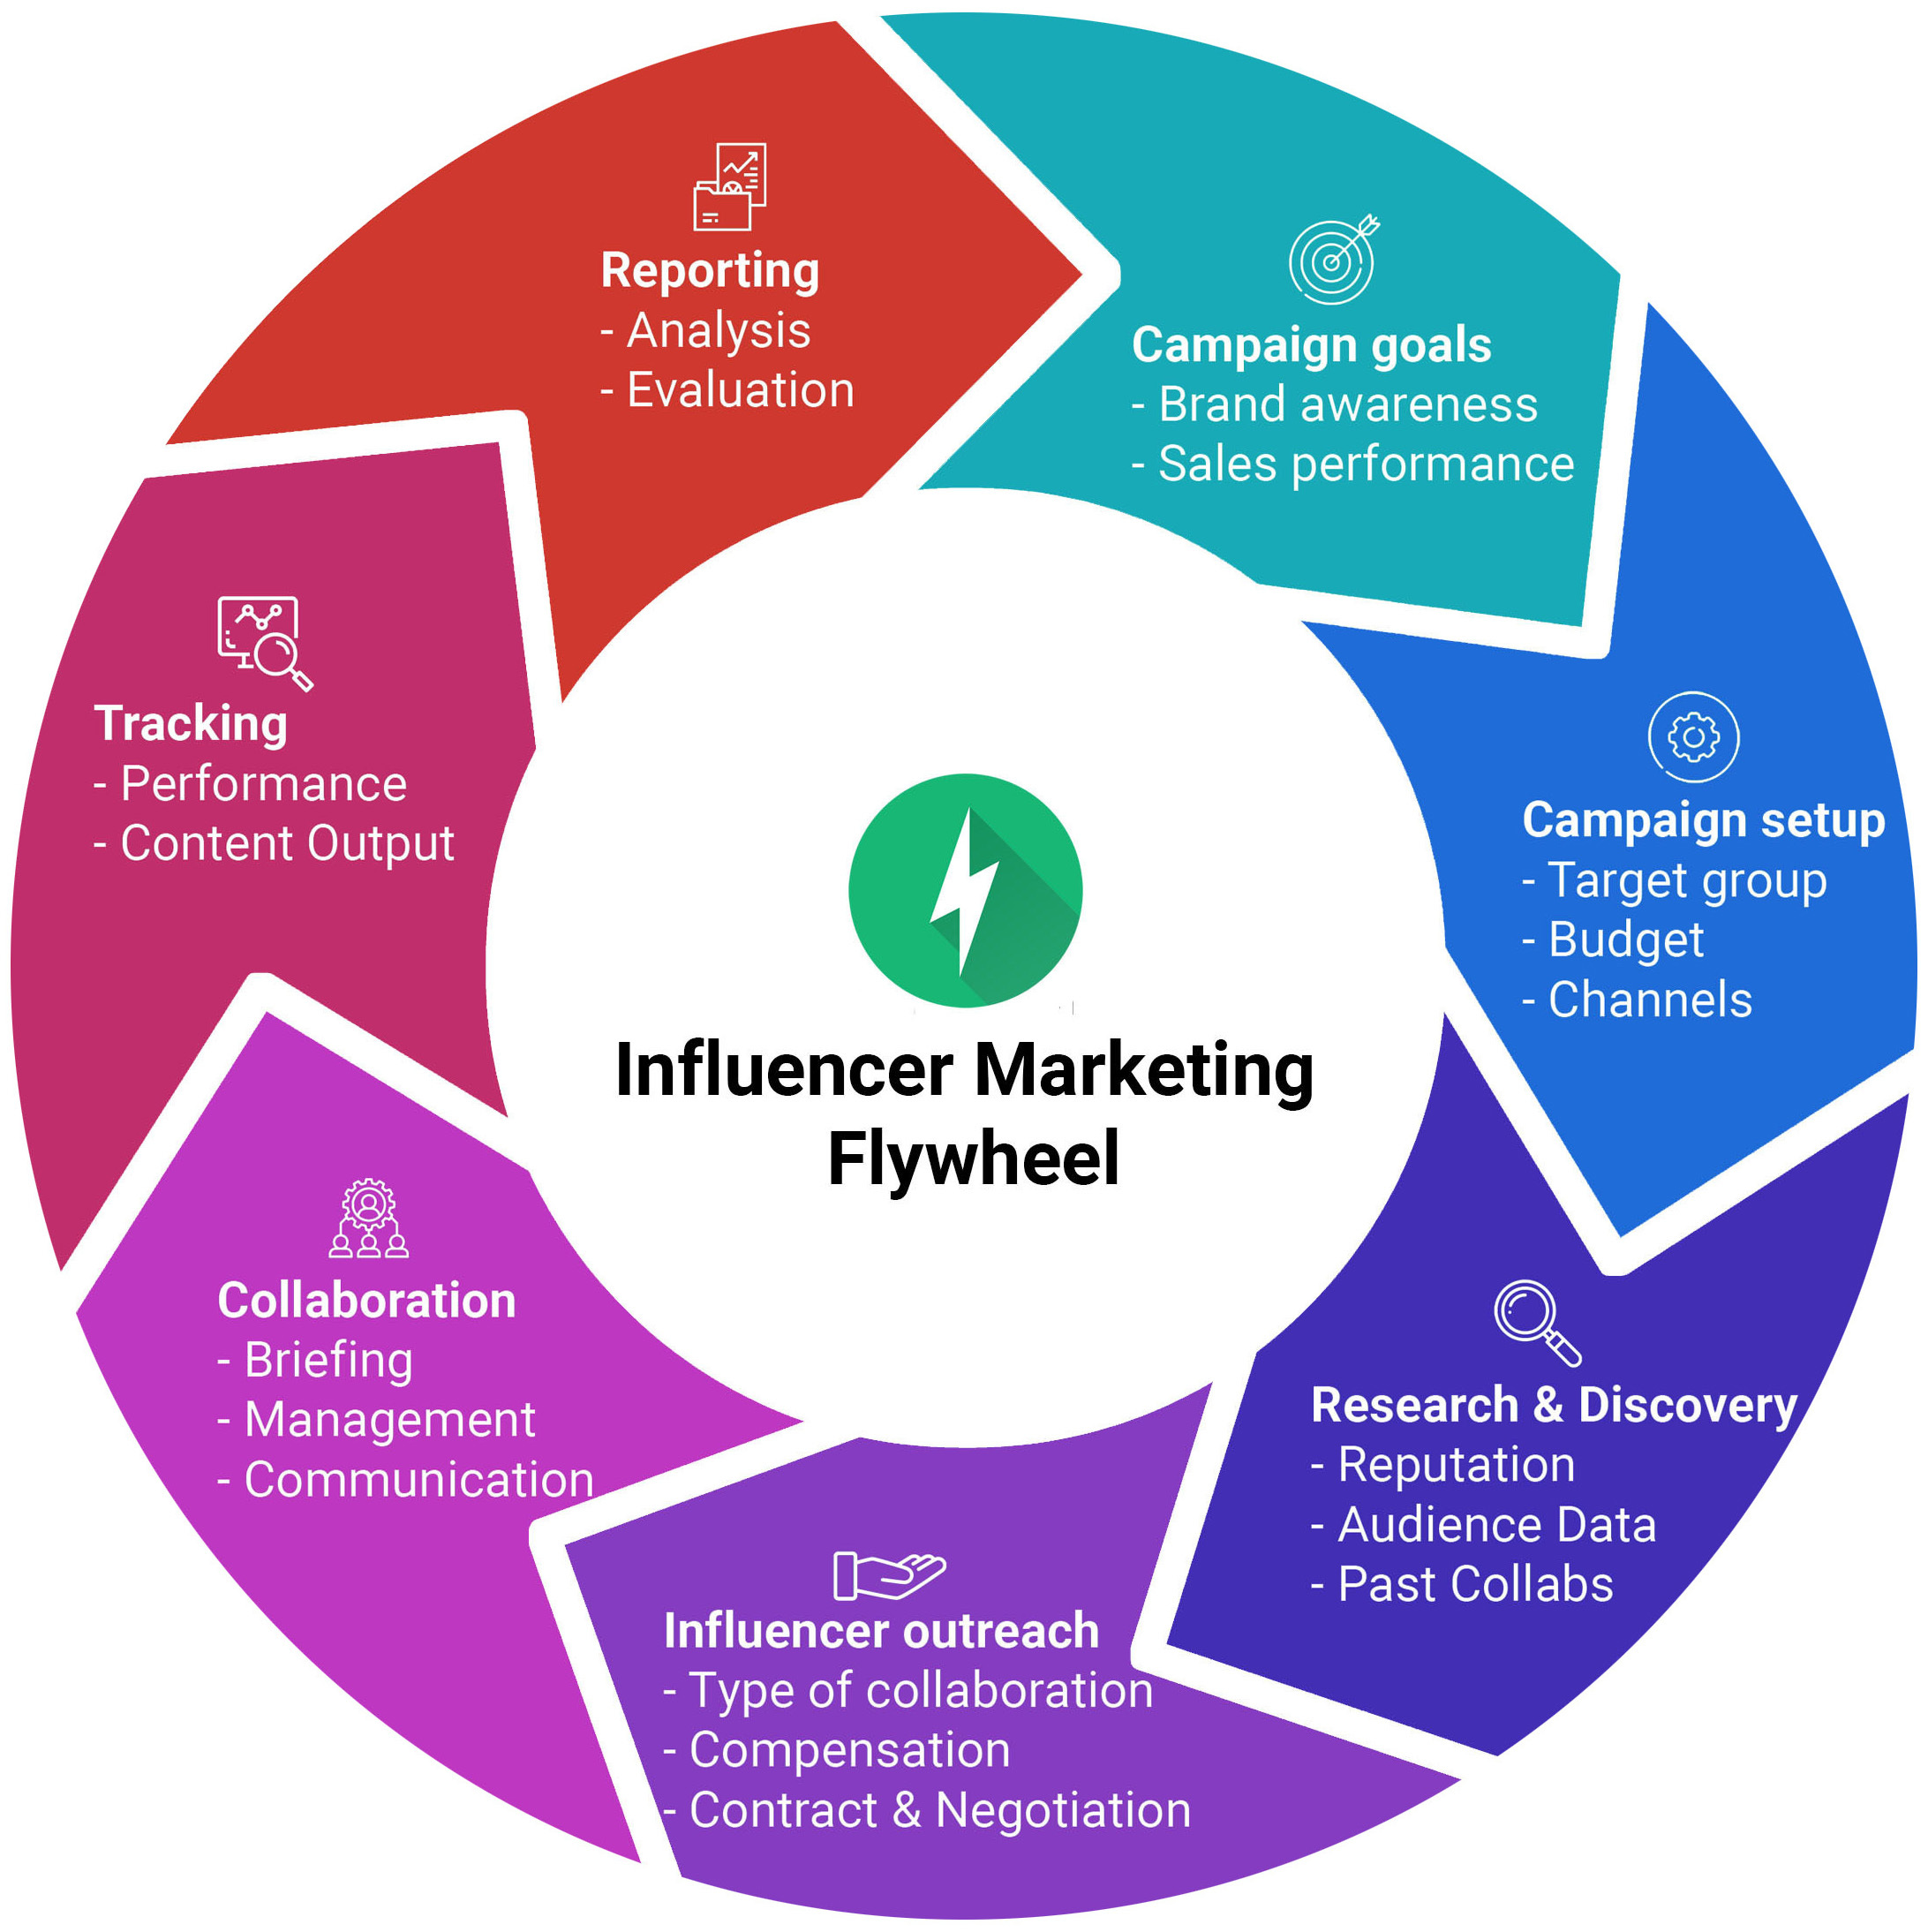 How to create an Influencer Marketing Strategy
